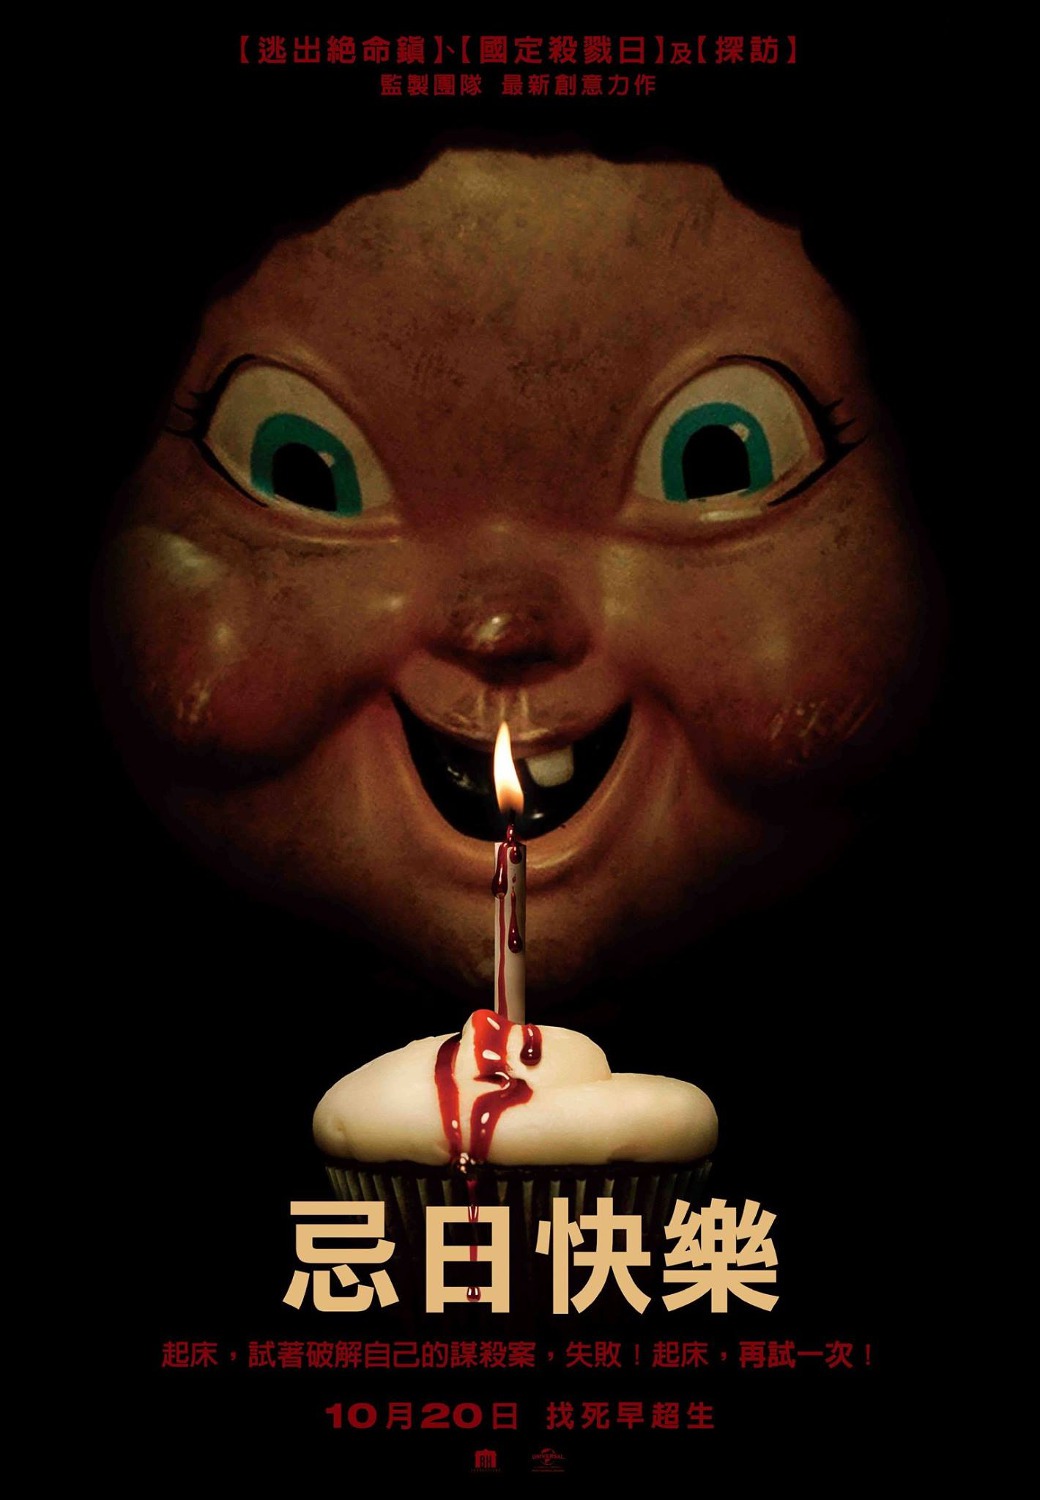 Extra Large Movie Poster Image for Happy Death Day (#2 of 2)